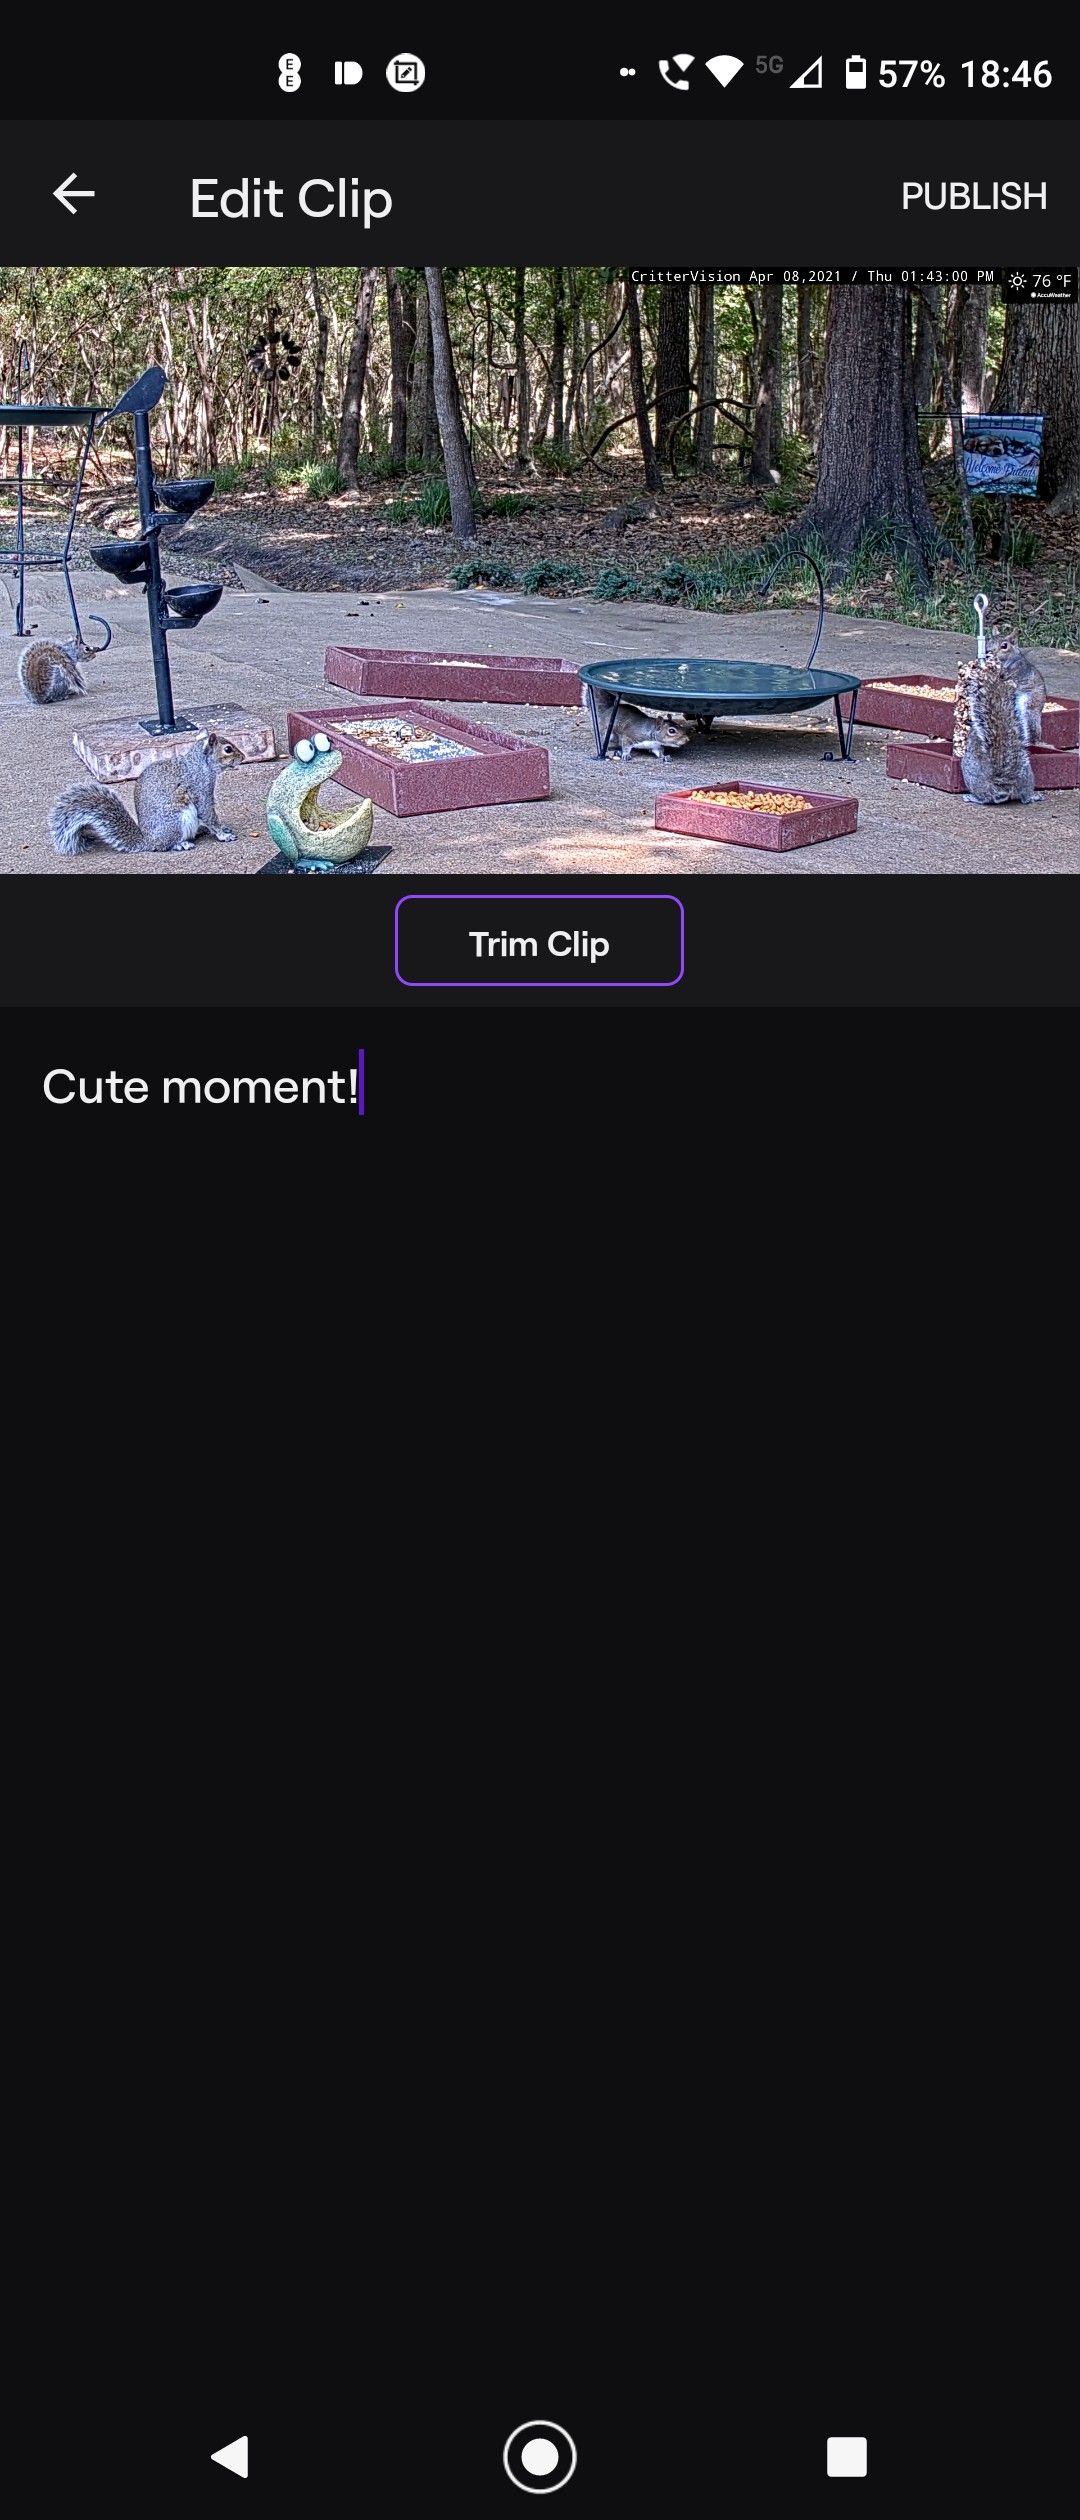 Publishing a clip on the Twitch app